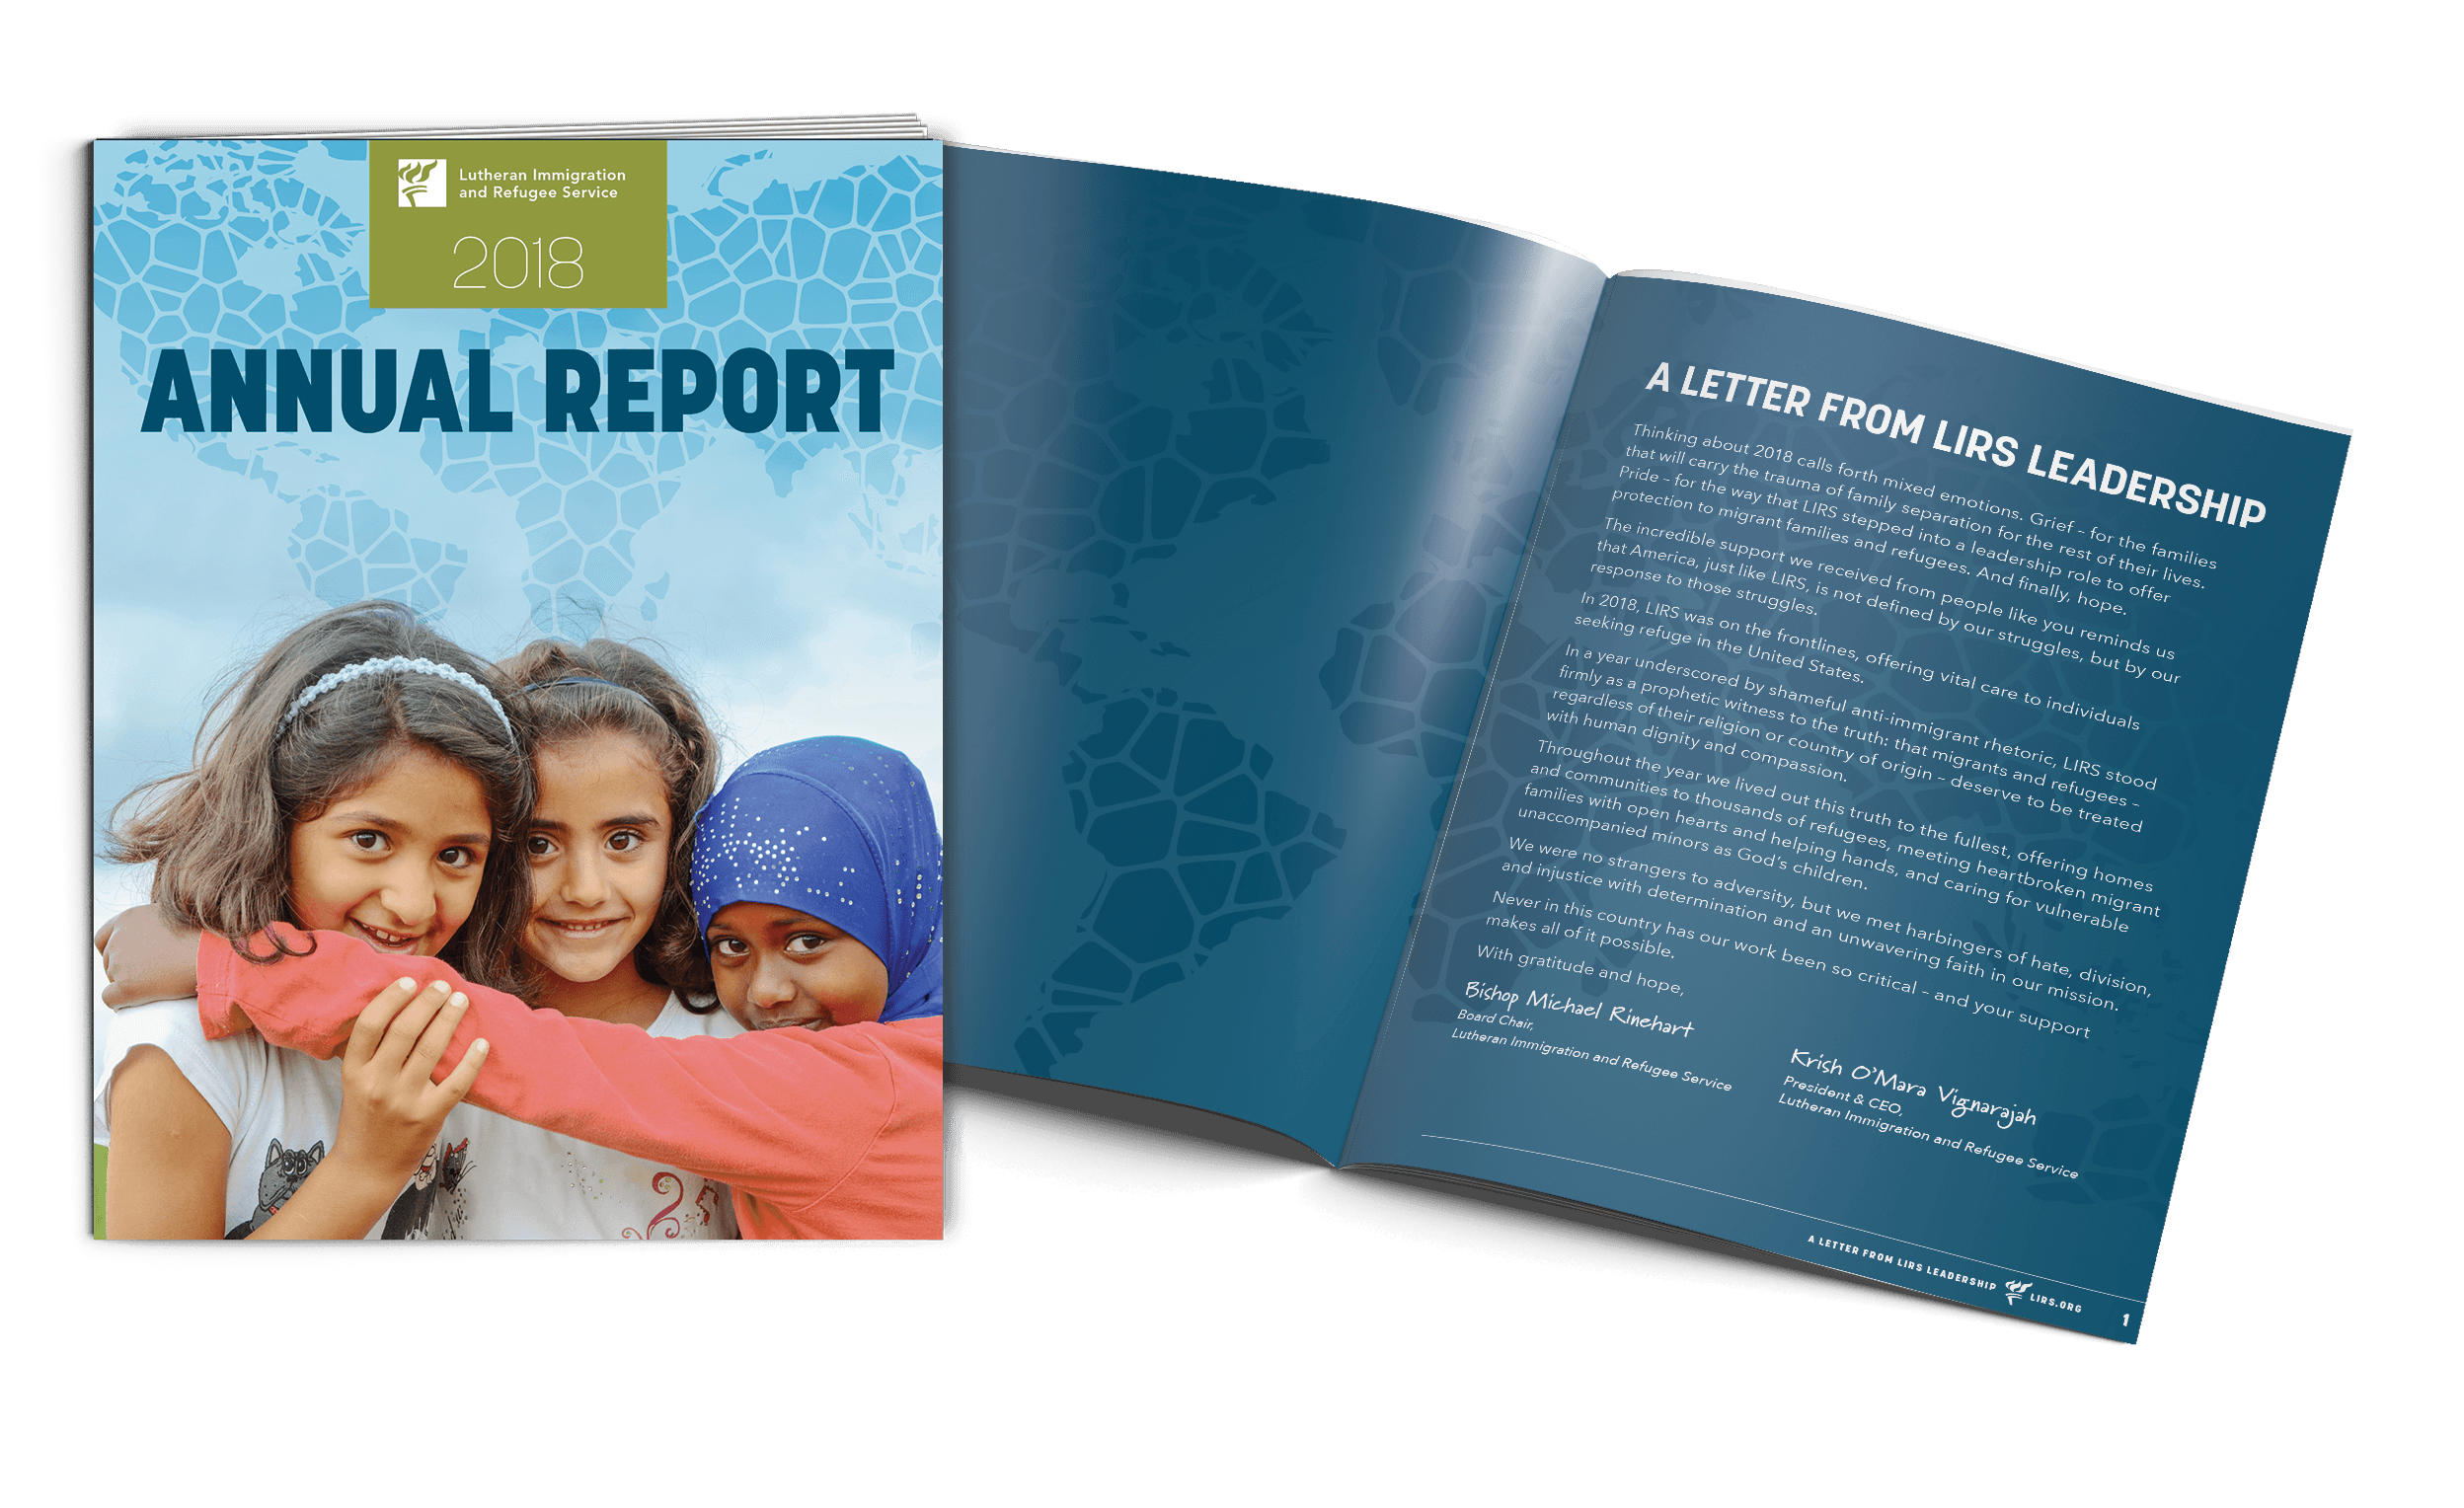 LIRS Annual Report 2018 Cover and interior welcome message